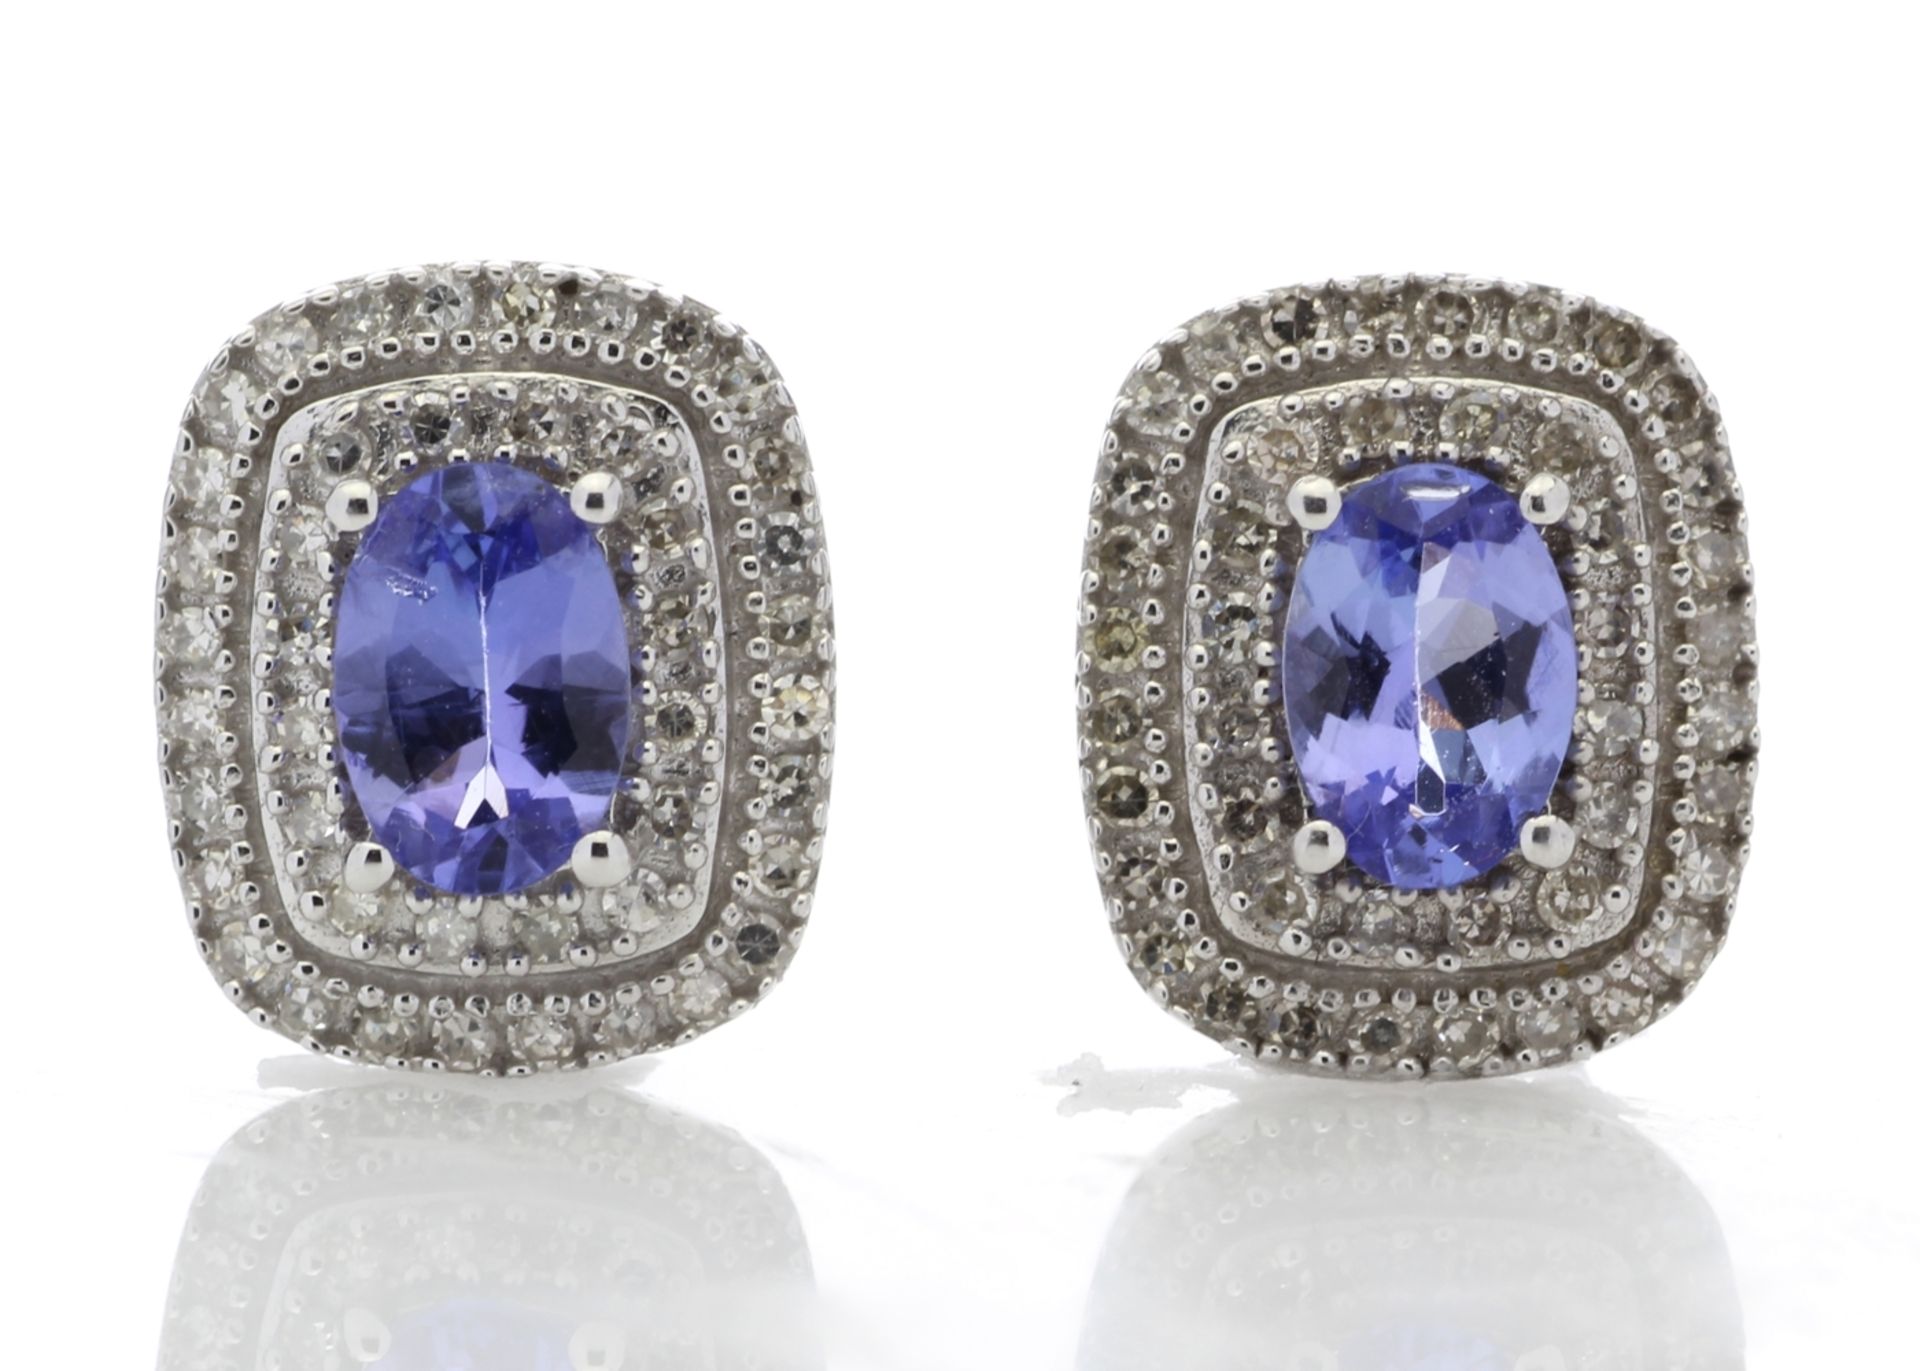 9ct White Gold Oval Diamond And Tanzanite Earring 0.35 Carats